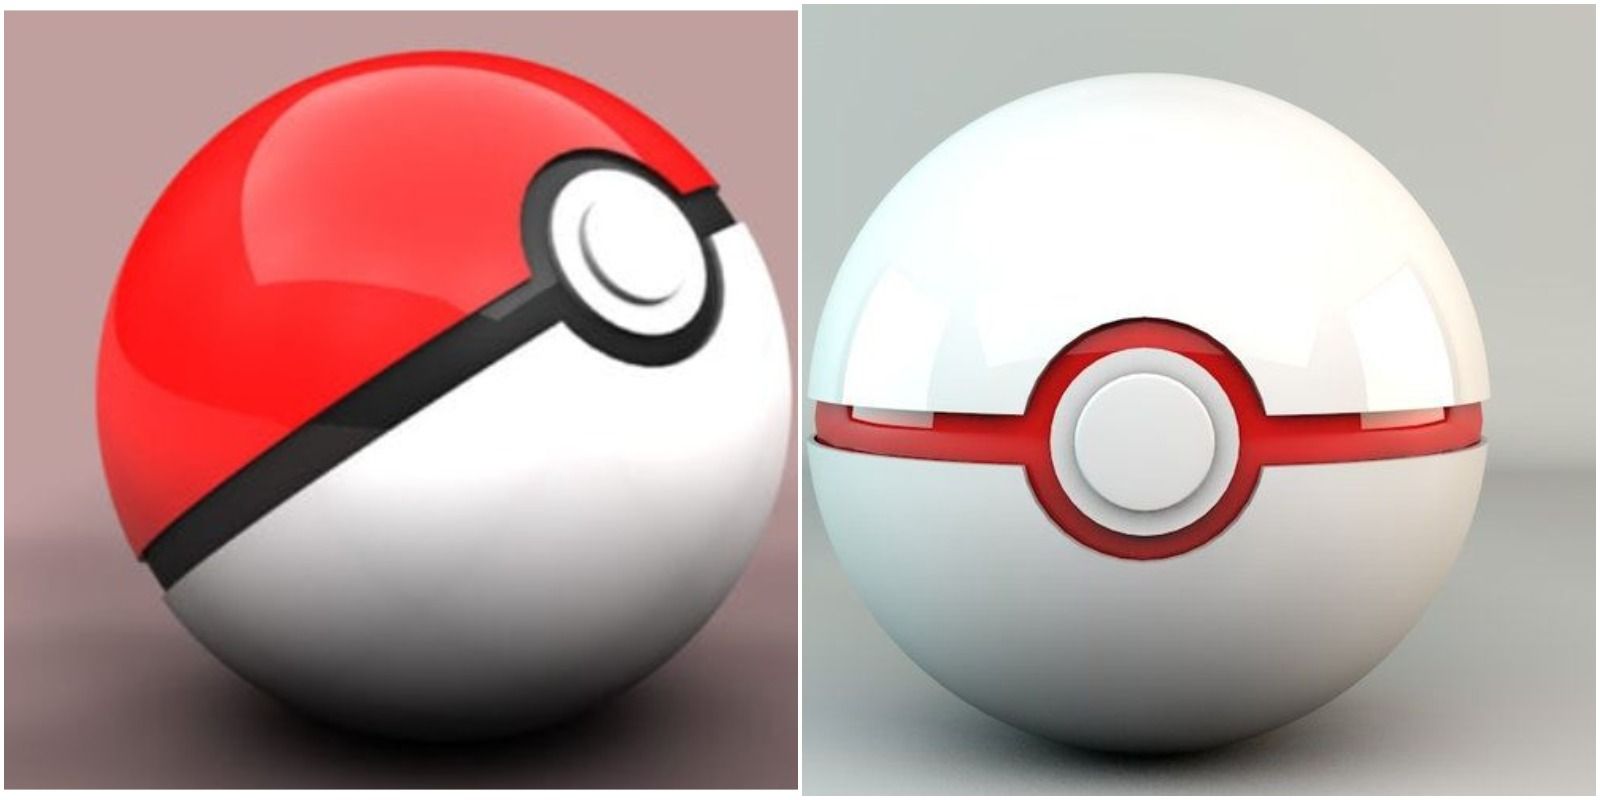 Every Type Of Poke Ball In Pokemon GO & What They Do